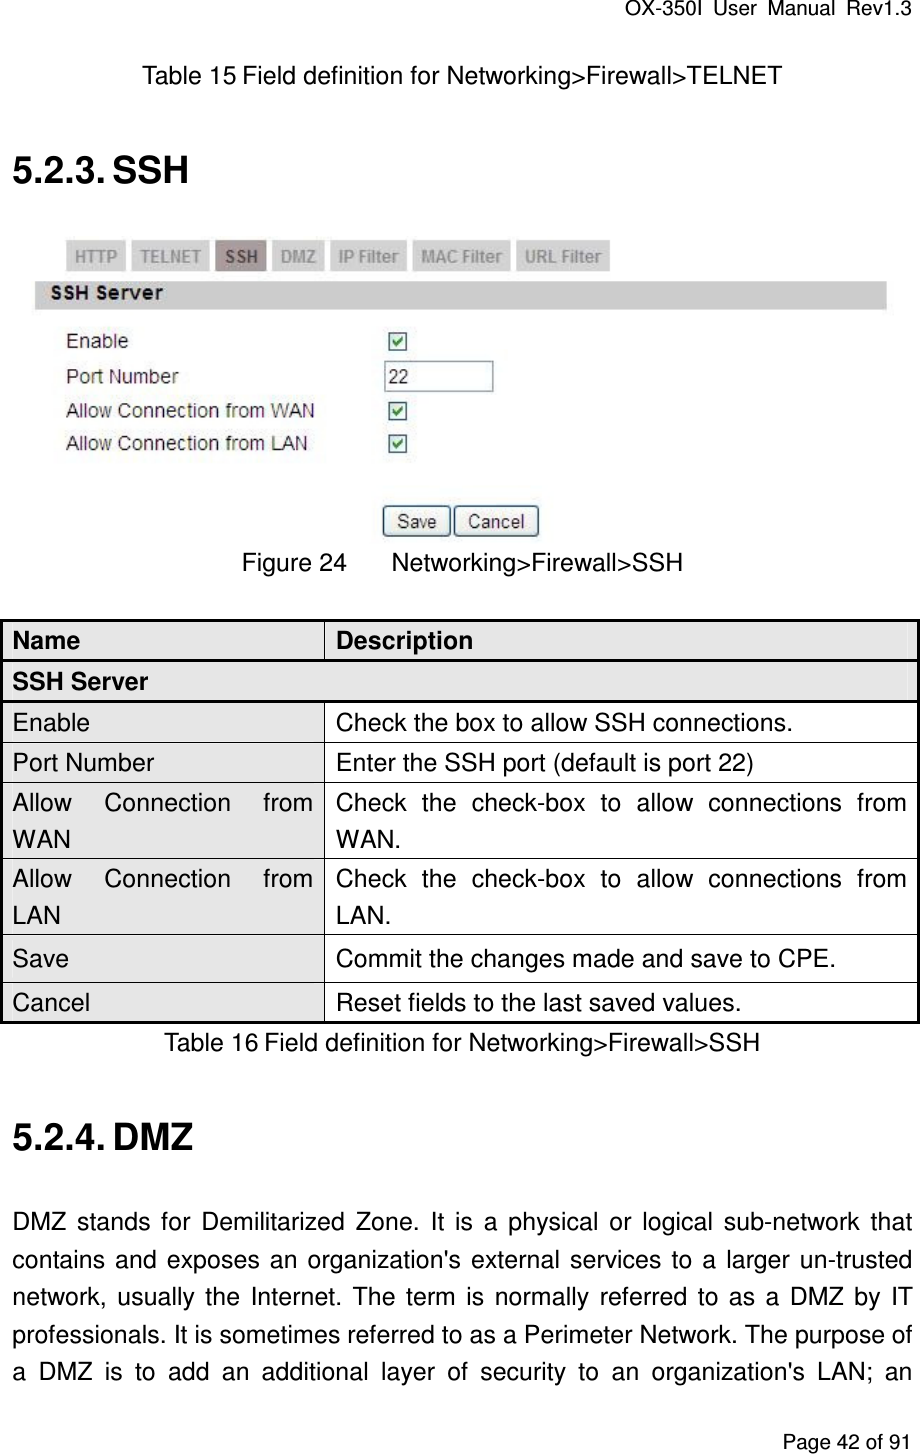 OX-350I  User  Manual  Rev1.3 Page 42 of 91 Table 15 Field definition for Networking&gt;Firewall&gt;TELNET 5.2.3. SSH  Figure 24  Networking&gt;Firewall&gt;SSH Name  Description SSH Server Enable    Check the box to allow SSH connections. Port Number  Enter the SSH port (default is port 22) Allow  Connection  from WAN Check  the  check-box  to  allow  connections  from WAN. Allow  Connection  from LAN Check  the  check-box  to  allow  connections  from LAN. Save  Commit the changes made and save to CPE. Cancel  Reset fields to the last saved values. Table 16 Field definition for Networking&gt;Firewall&gt;SSH 5.2.4. DMZ DMZ  stands  for  Demilitarized  Zone.  It  is  a  physical  or  logical  sub-network  that contains and  exposes  an organization&apos;s  external  services  to  a  larger un-trusted network,  usually  the  Internet.  The  term  is  normally  referred  to  as  a  DMZ  by  IT professionals. It is sometimes referred to as a Perimeter Network. The purpose of a  DMZ  is  to  add  an  additional  layer  of  security  to  an  organization&apos;s  LAN;  an 